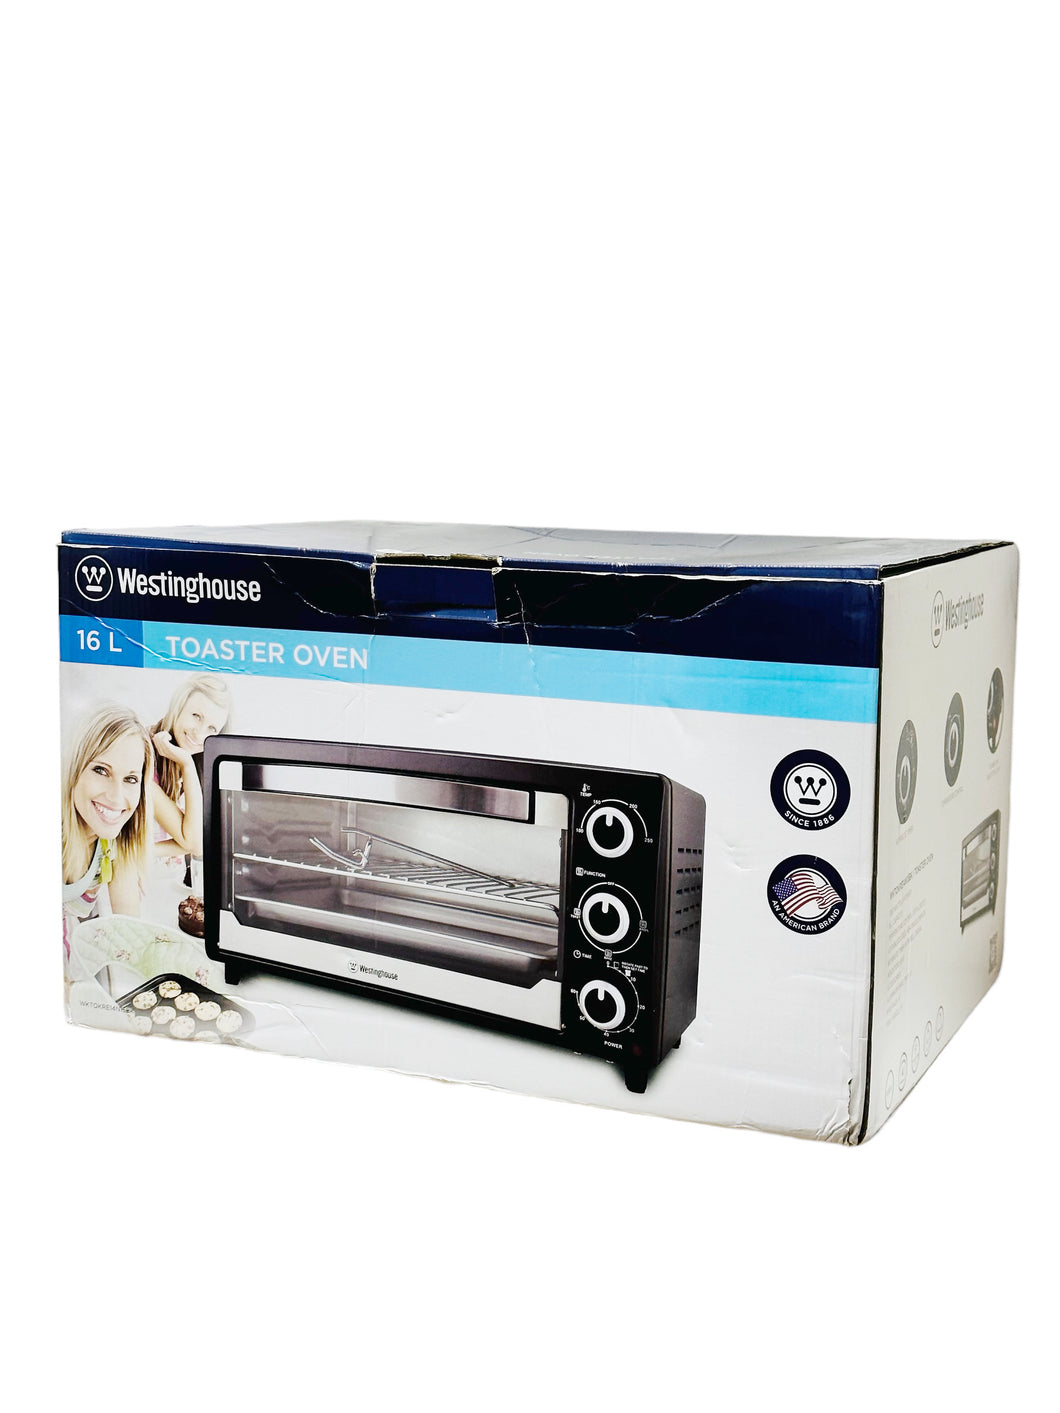 Westing House 16L Toaster Oven 家用烤箱